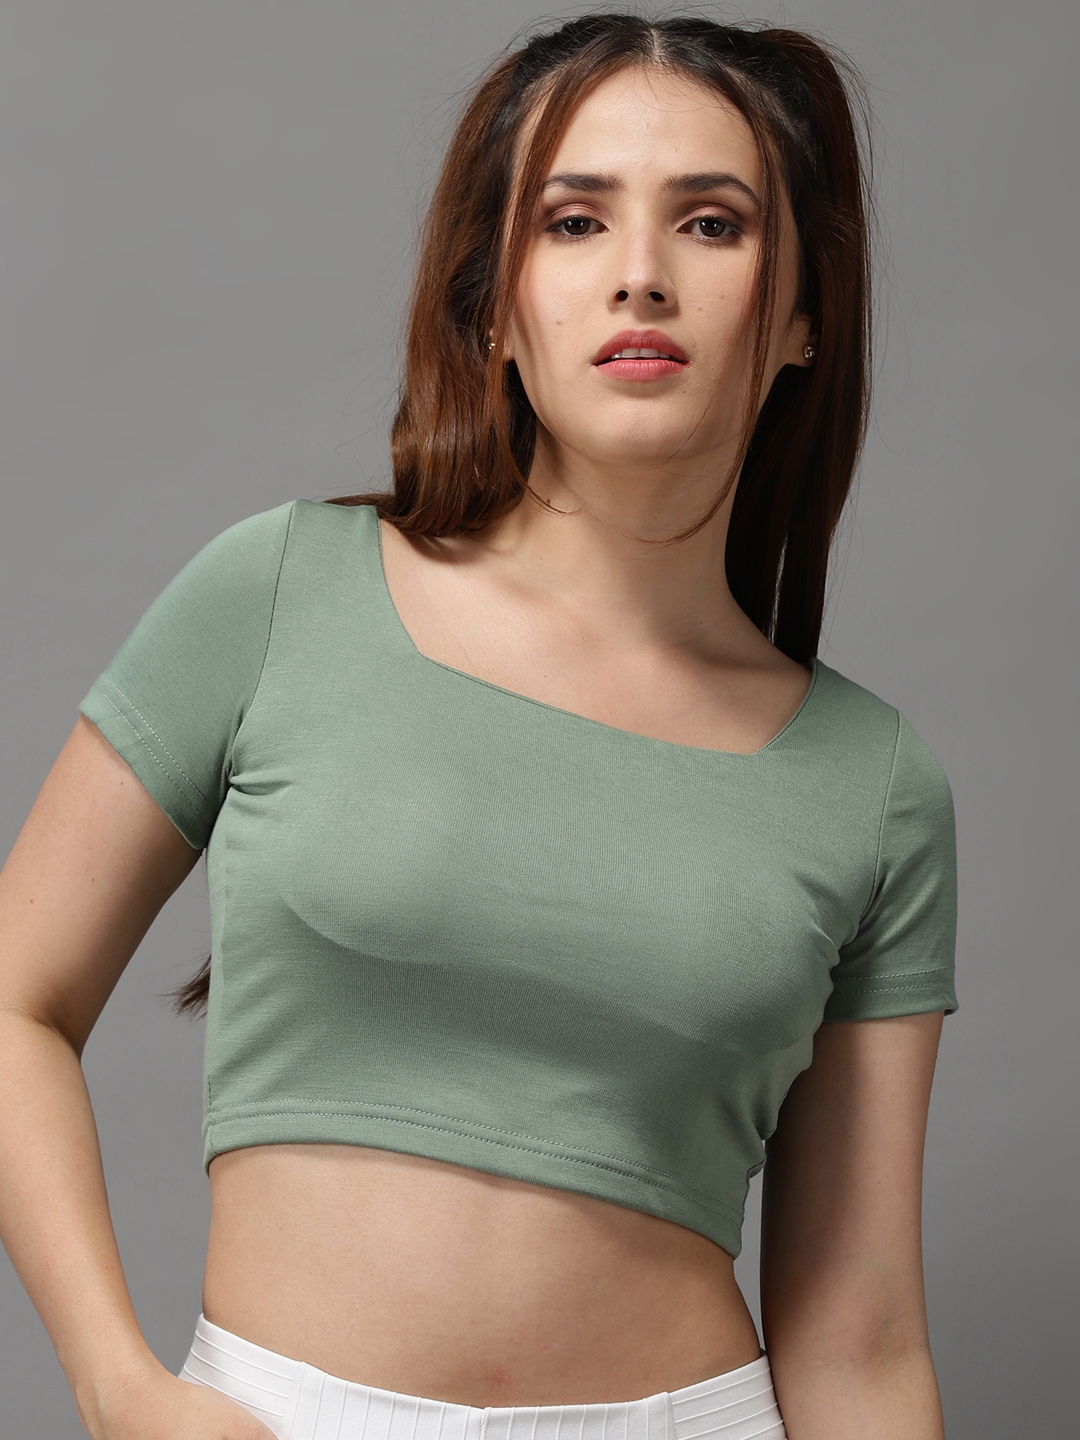 SHOWOFF Women's Scoop Neck Green Fitted Regular Top